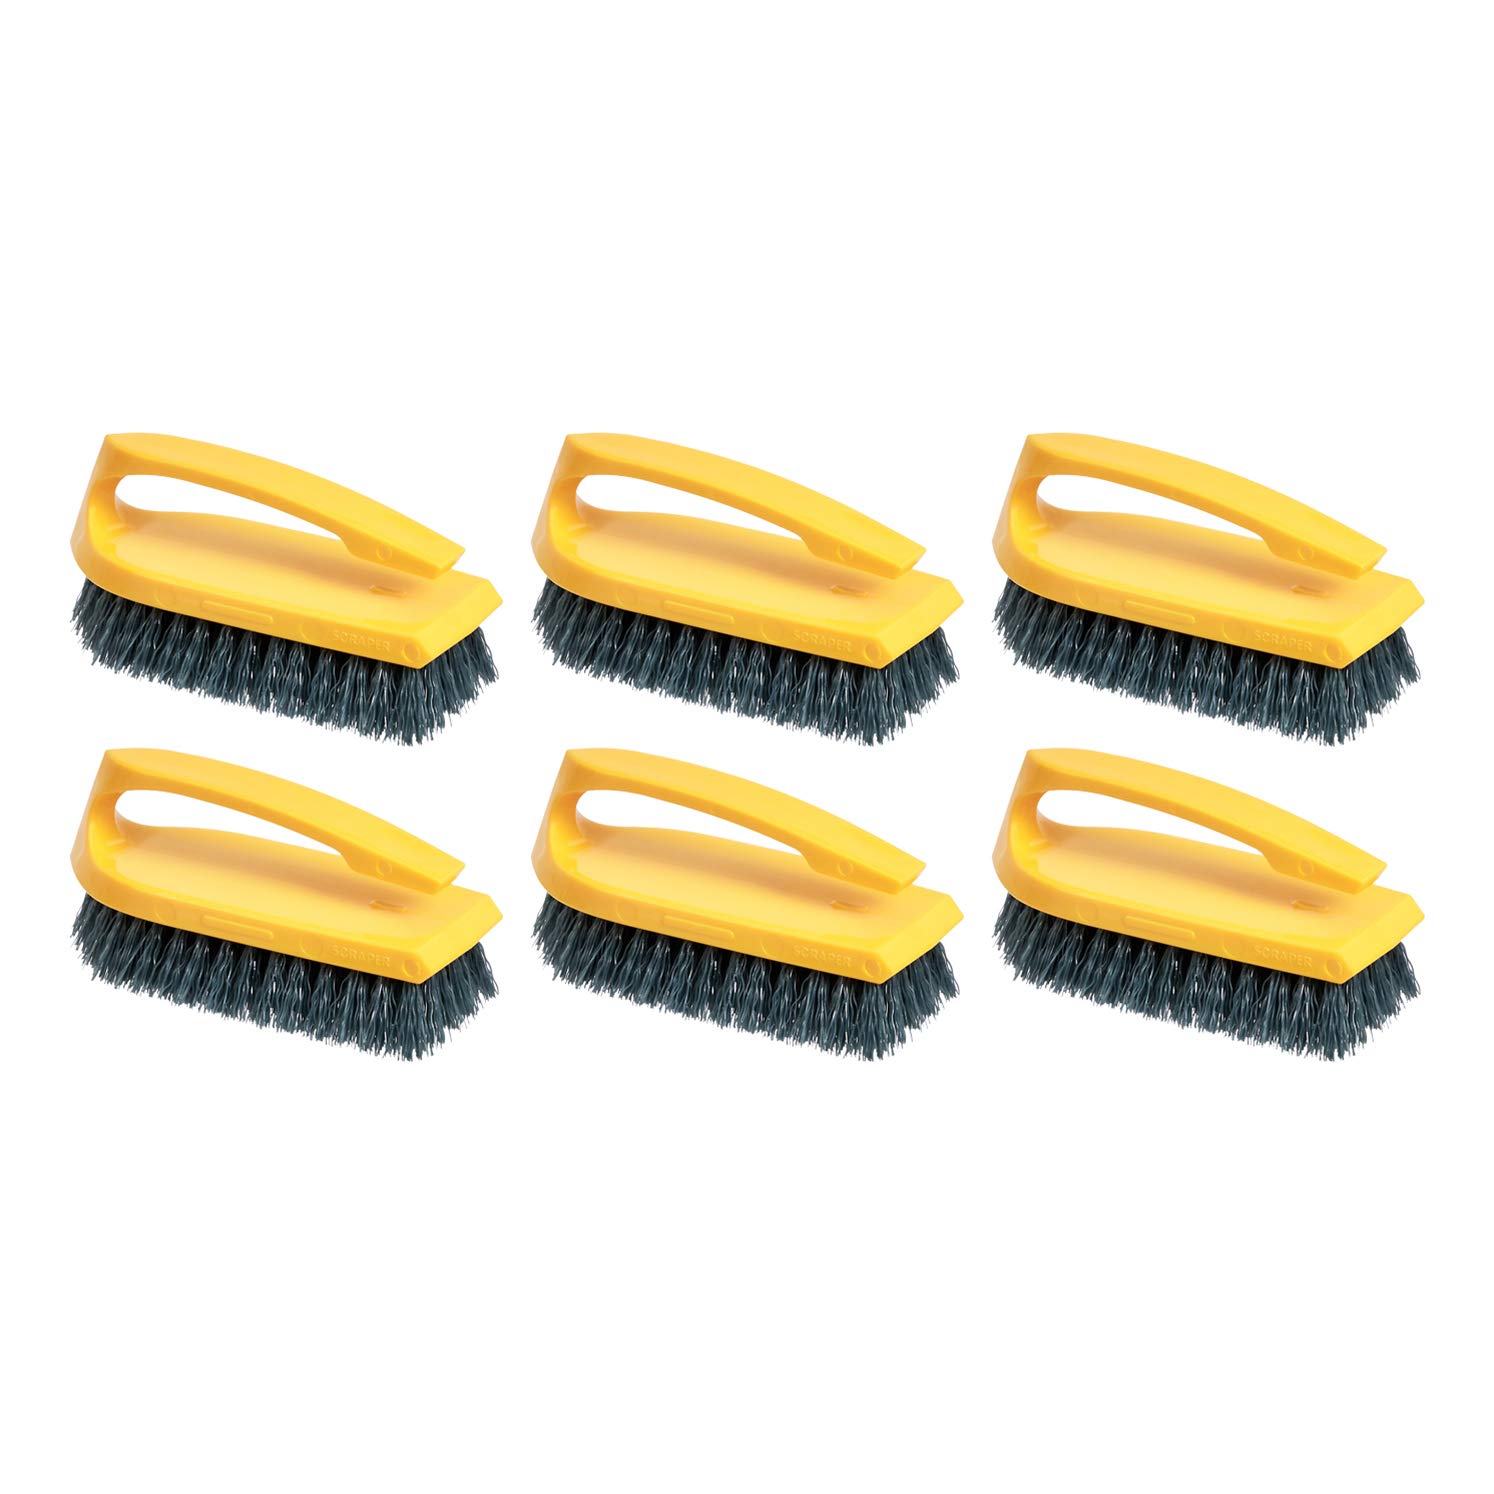 Prime Members: 6-Pack AmazonCommercial Heavy-Duty Floor Scrub Brush $9.45 + Free Shipping